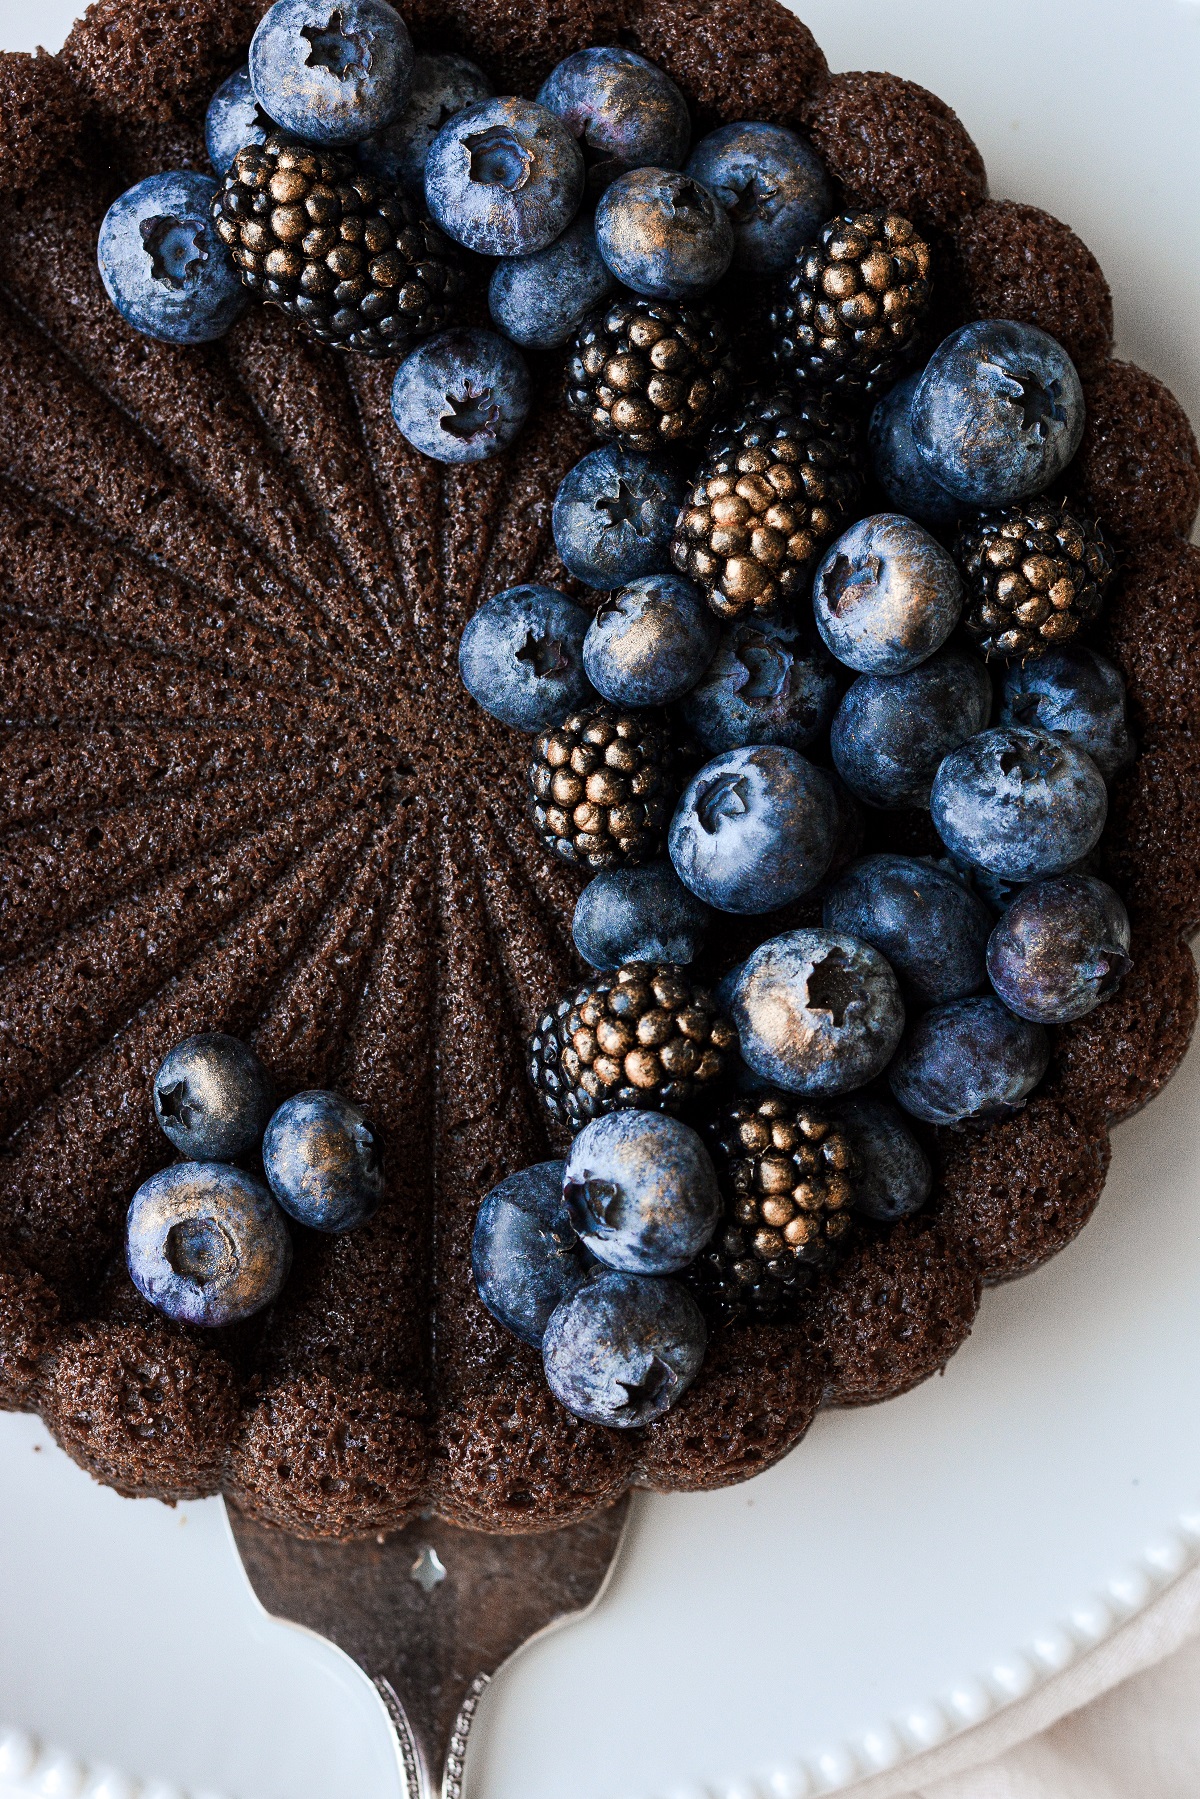 Chocolate Charlotte cake topped with blueberries and blackberries.